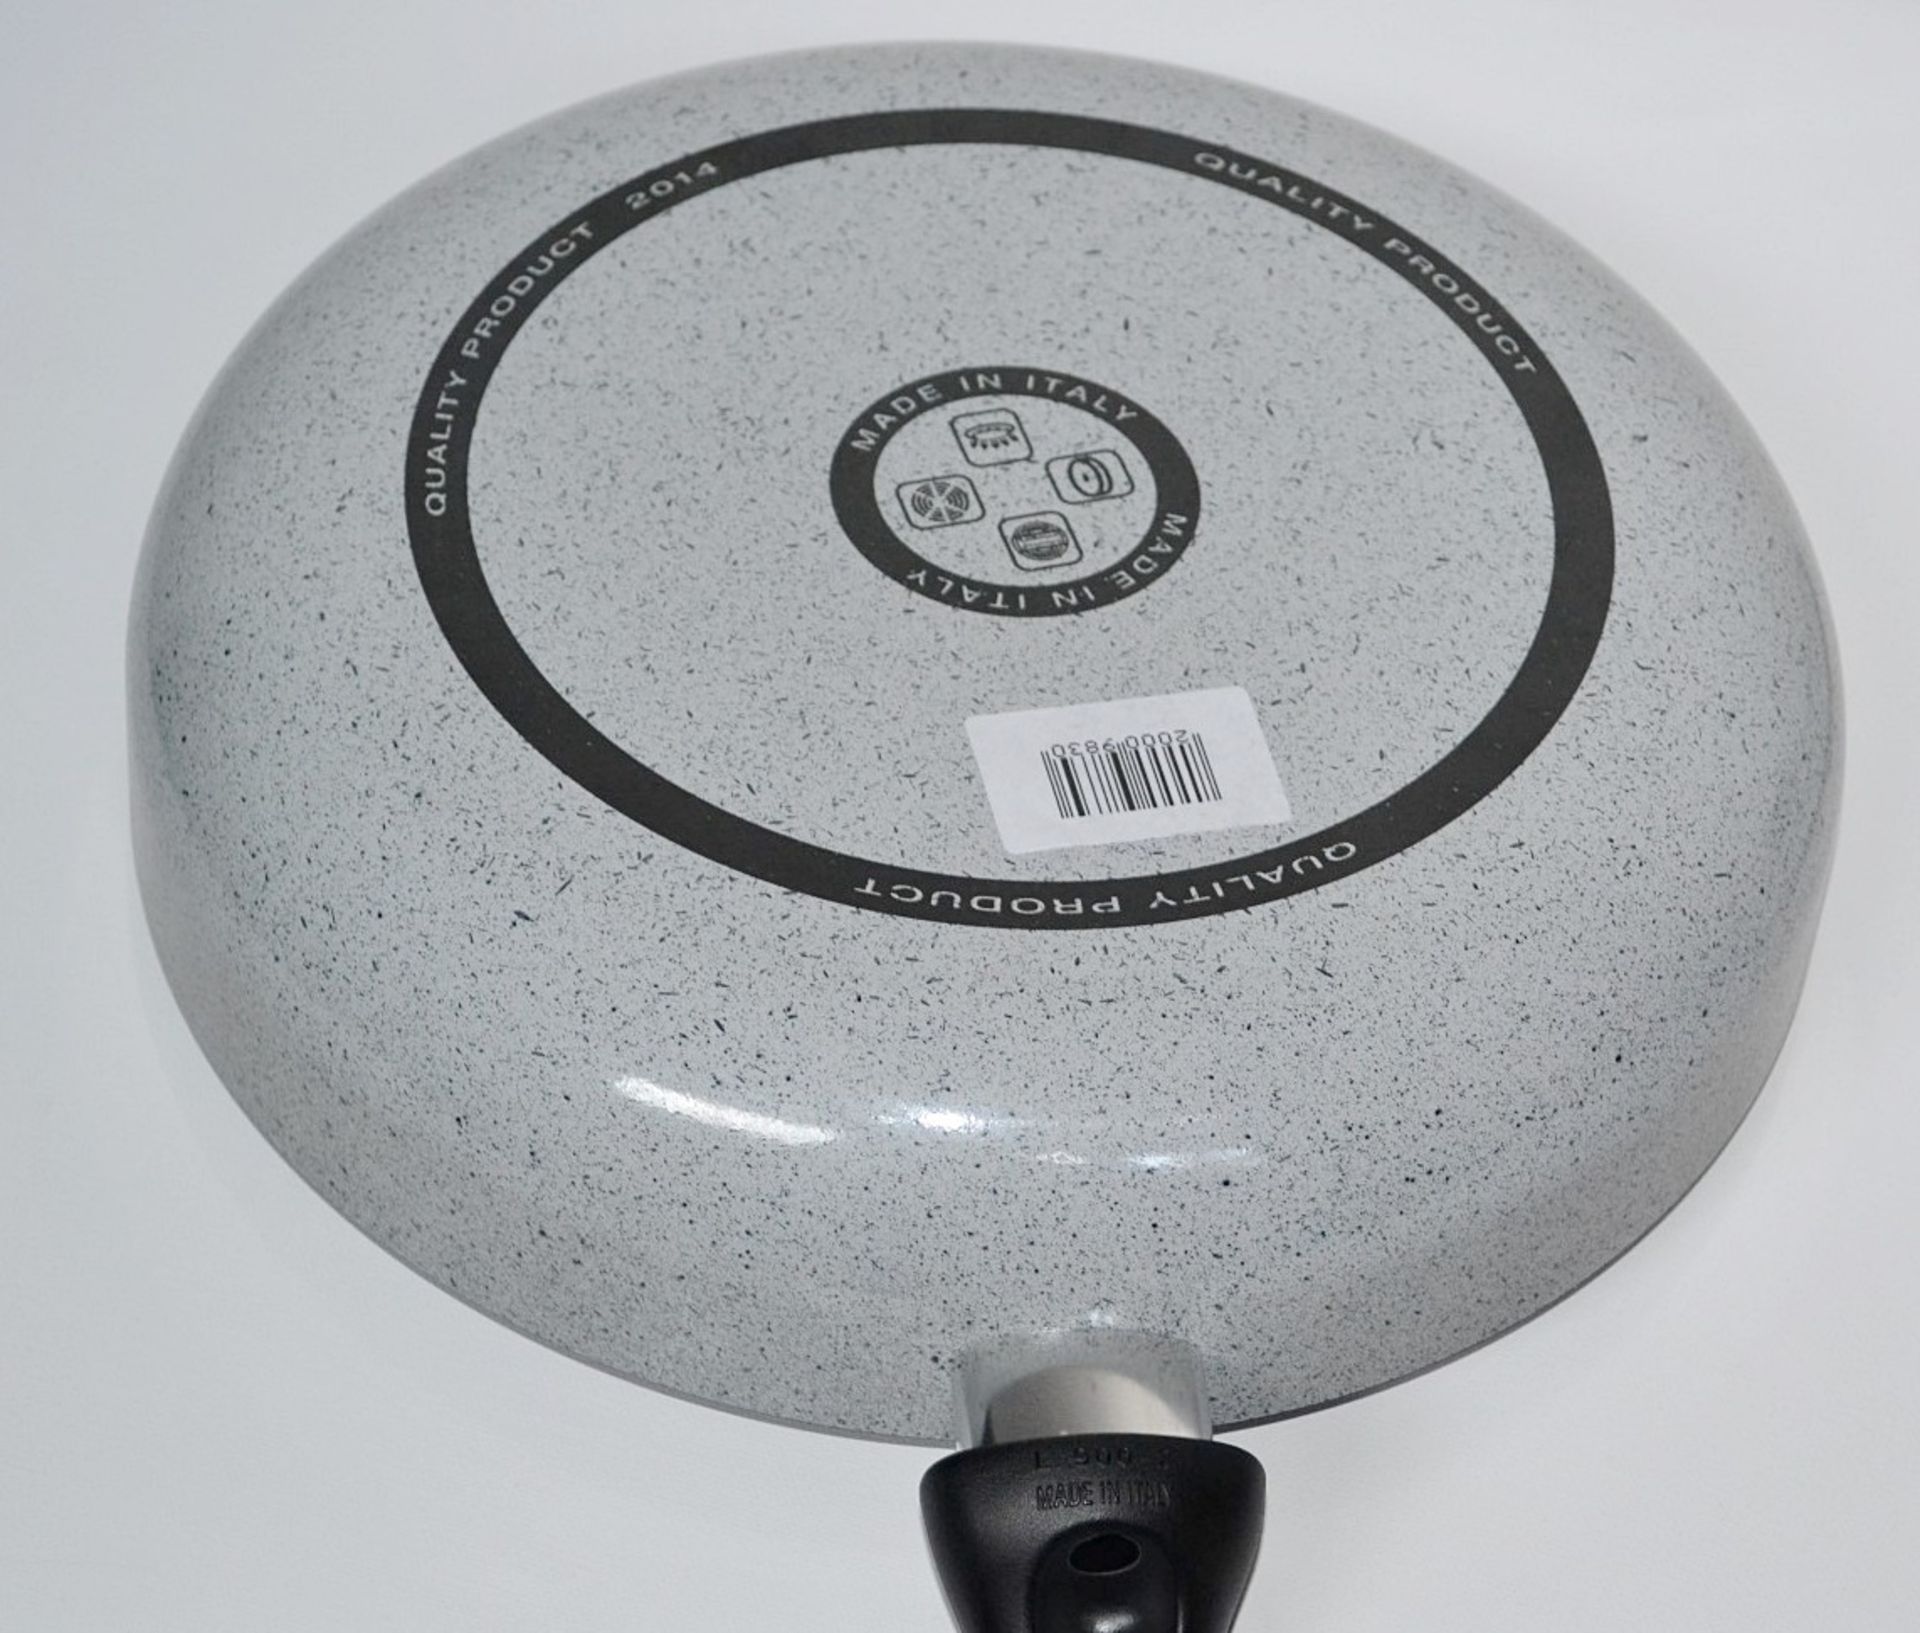 1 x 28cm Non-stick Frying Pans with Glass Lids - Colour: Stone Grey - Made In Italy - New & Sealed - Image 3 of 5